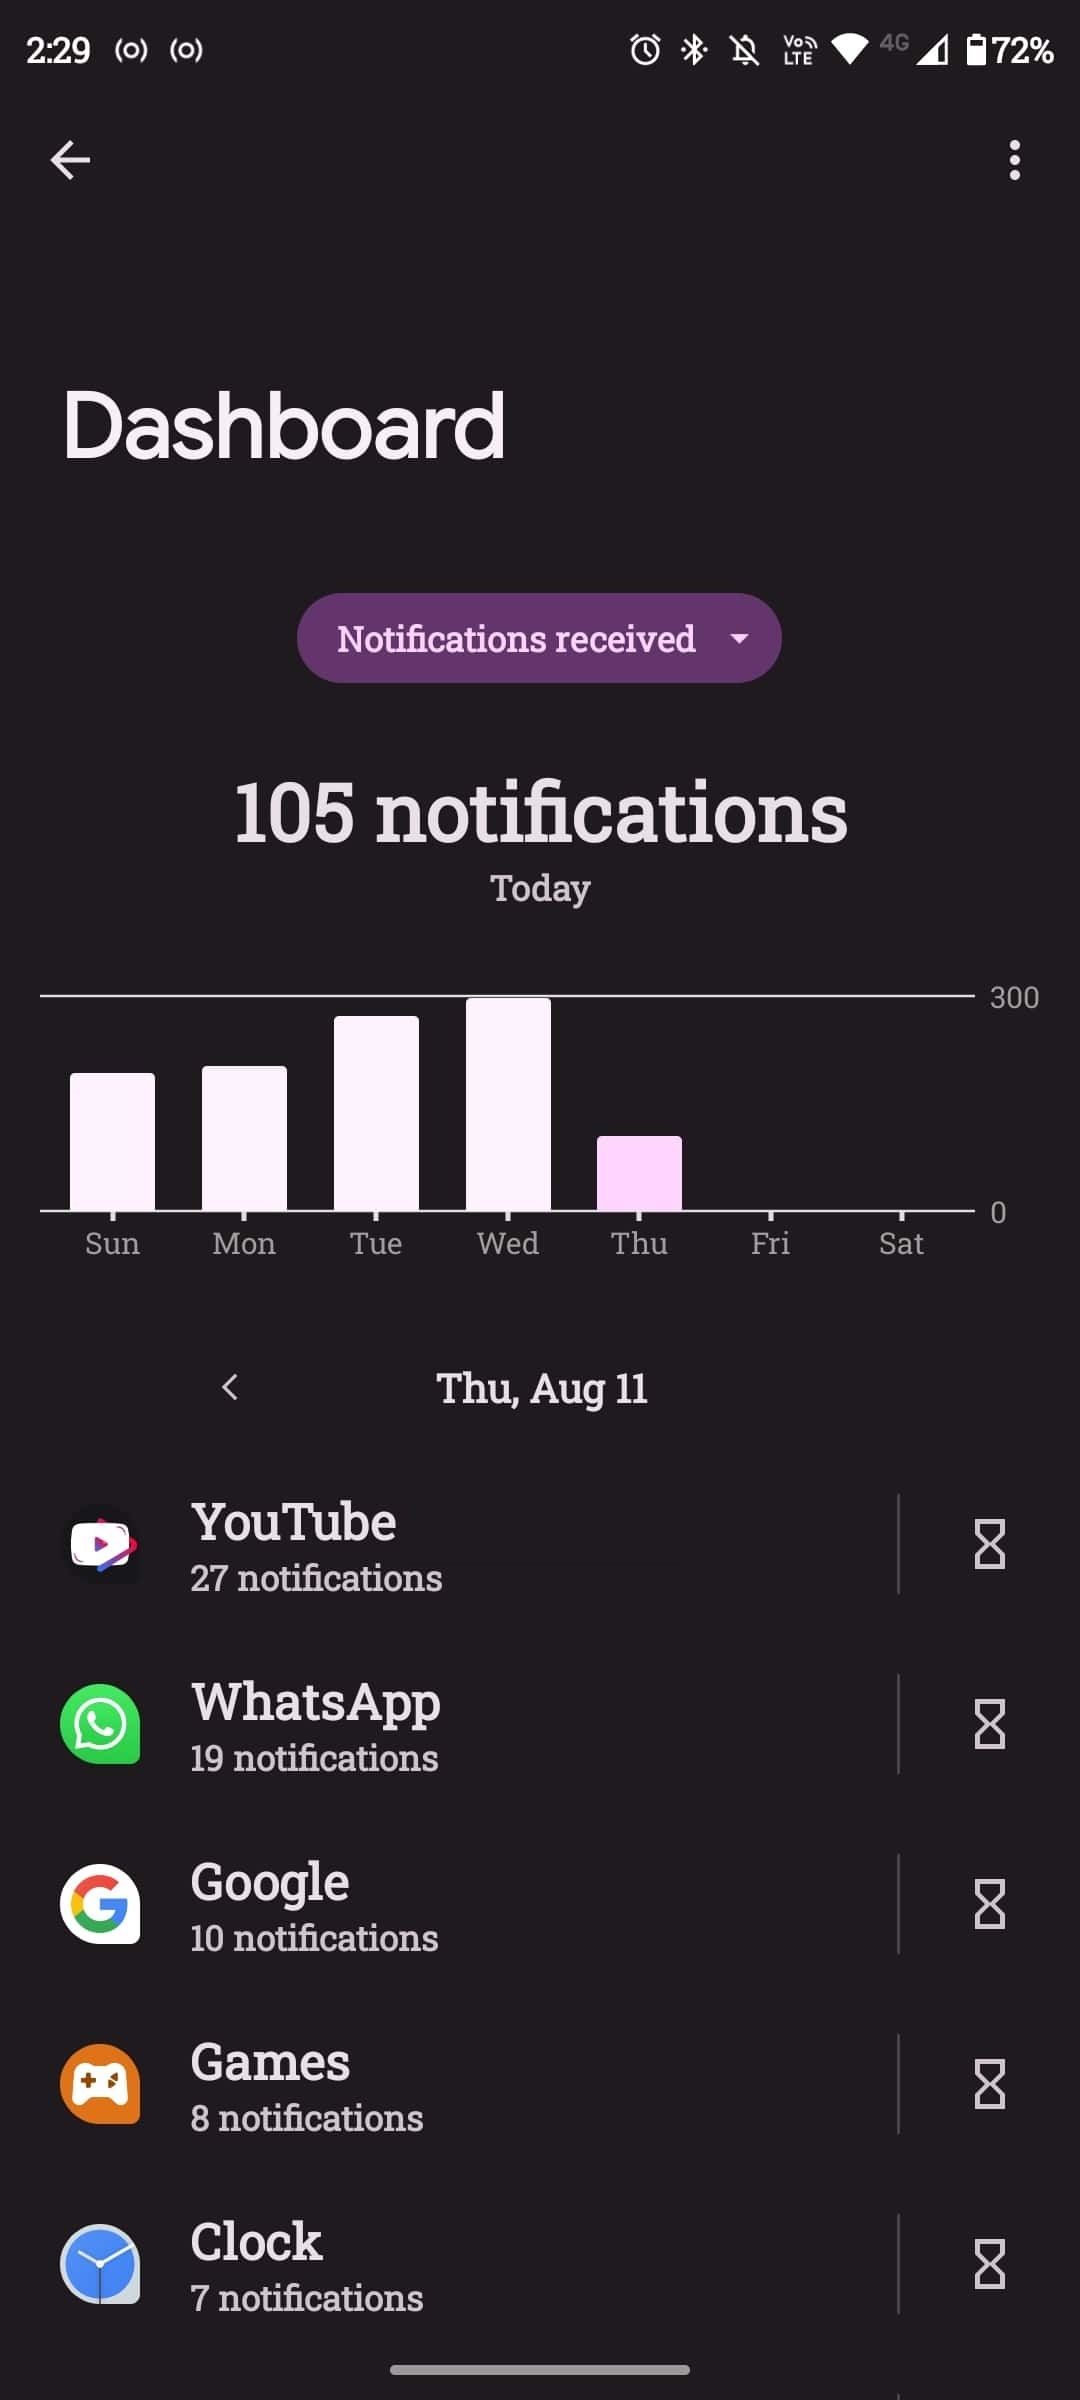 List of apps and number of notifications